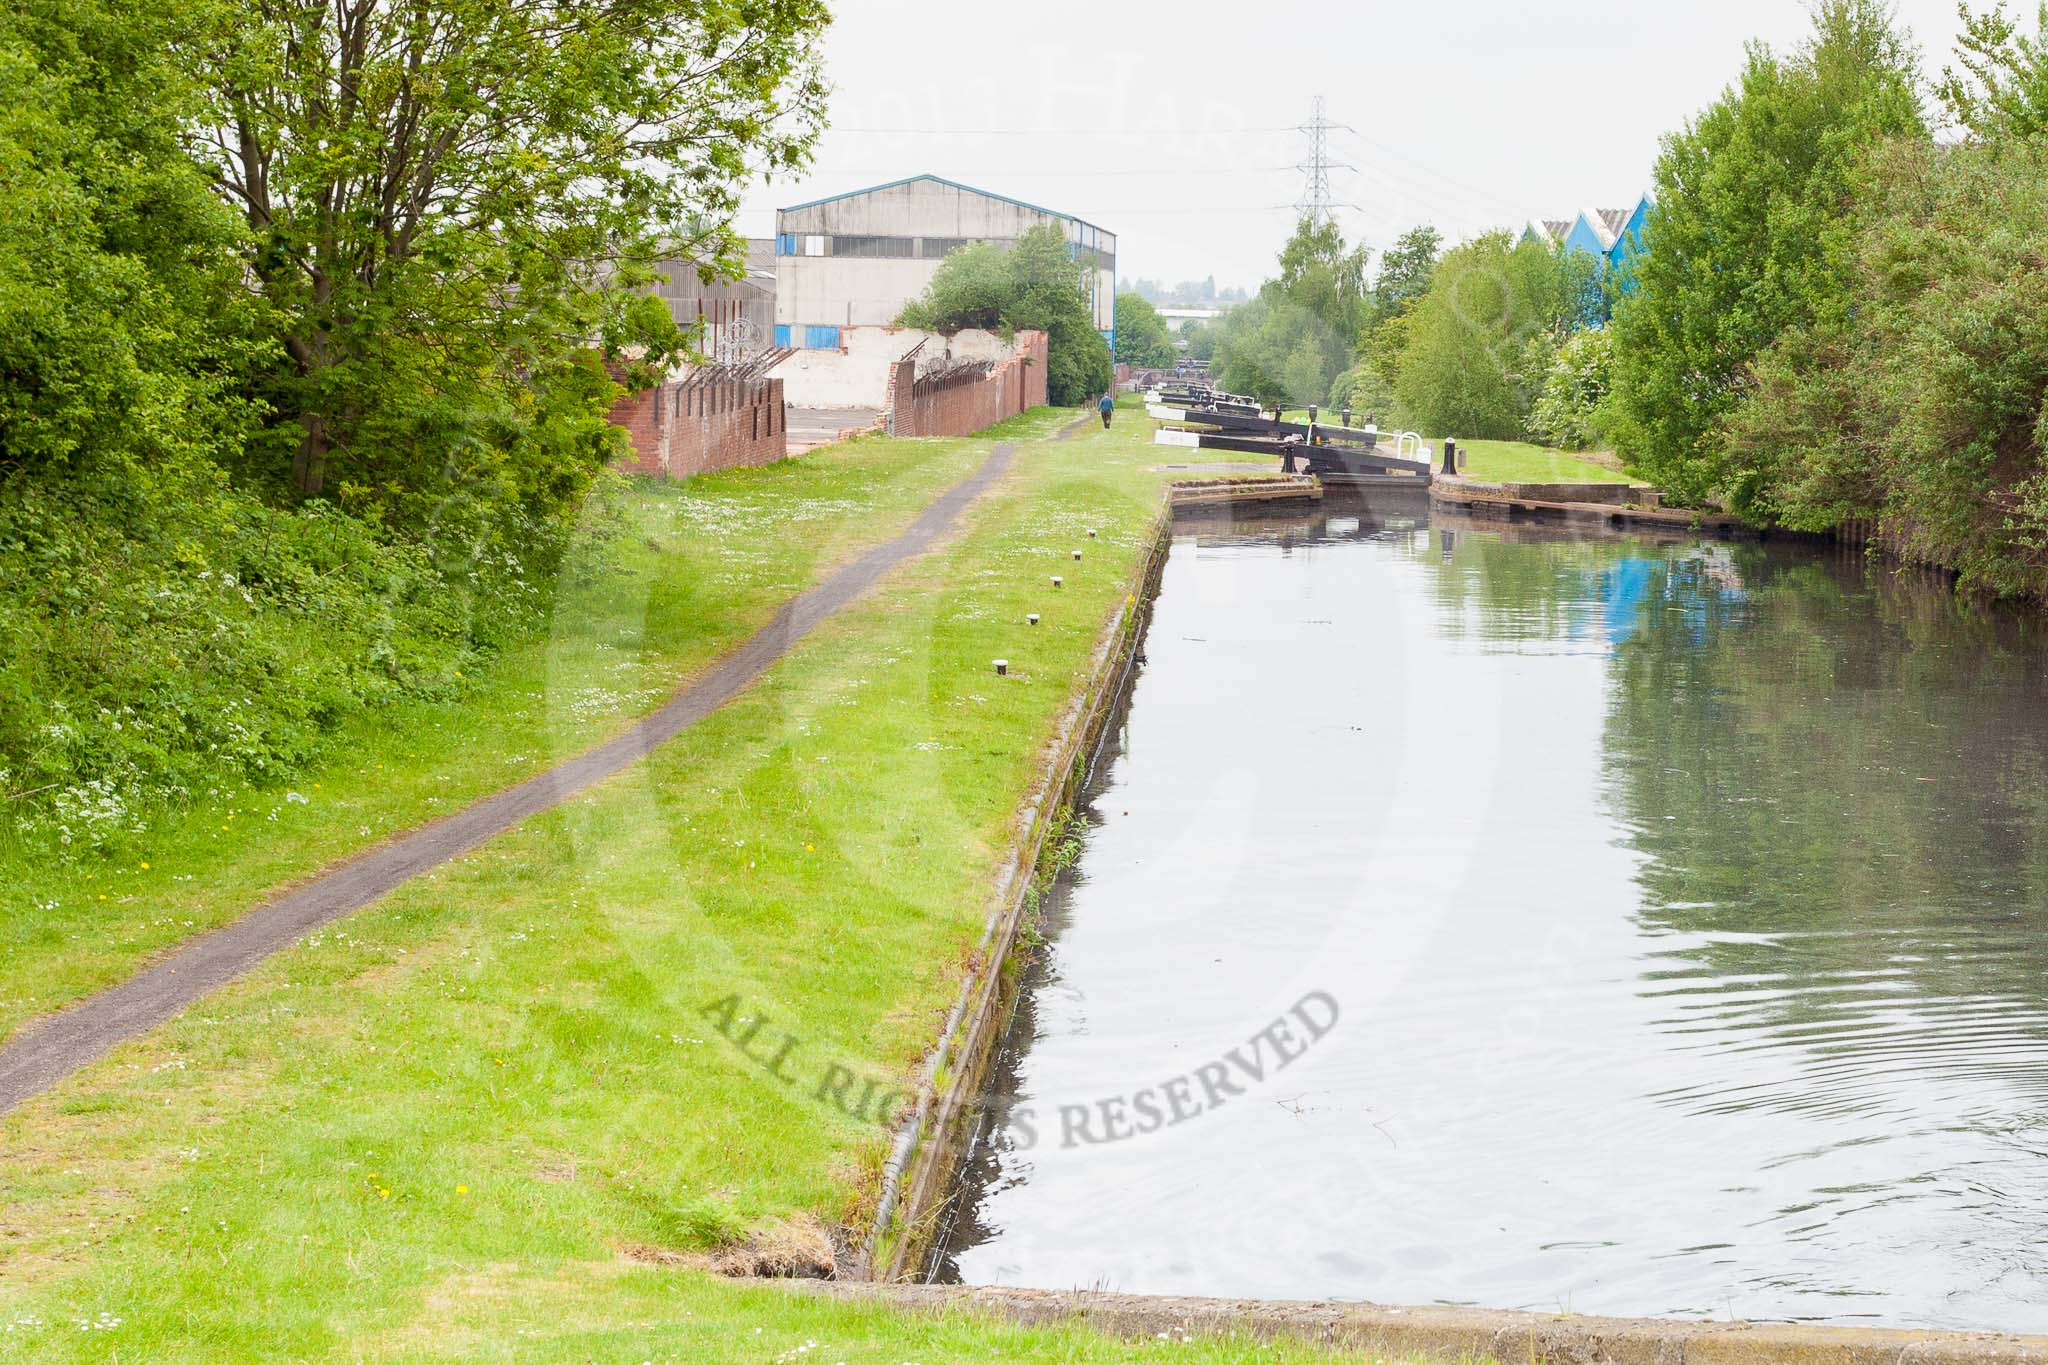 BCN 24h Marathon Challenge 2015: Ryders Green Locks on the Walsall Canal, seen from the top lock.
Birmingham Canal Navigations,



on 23 May 2015 at 13:45, image #114